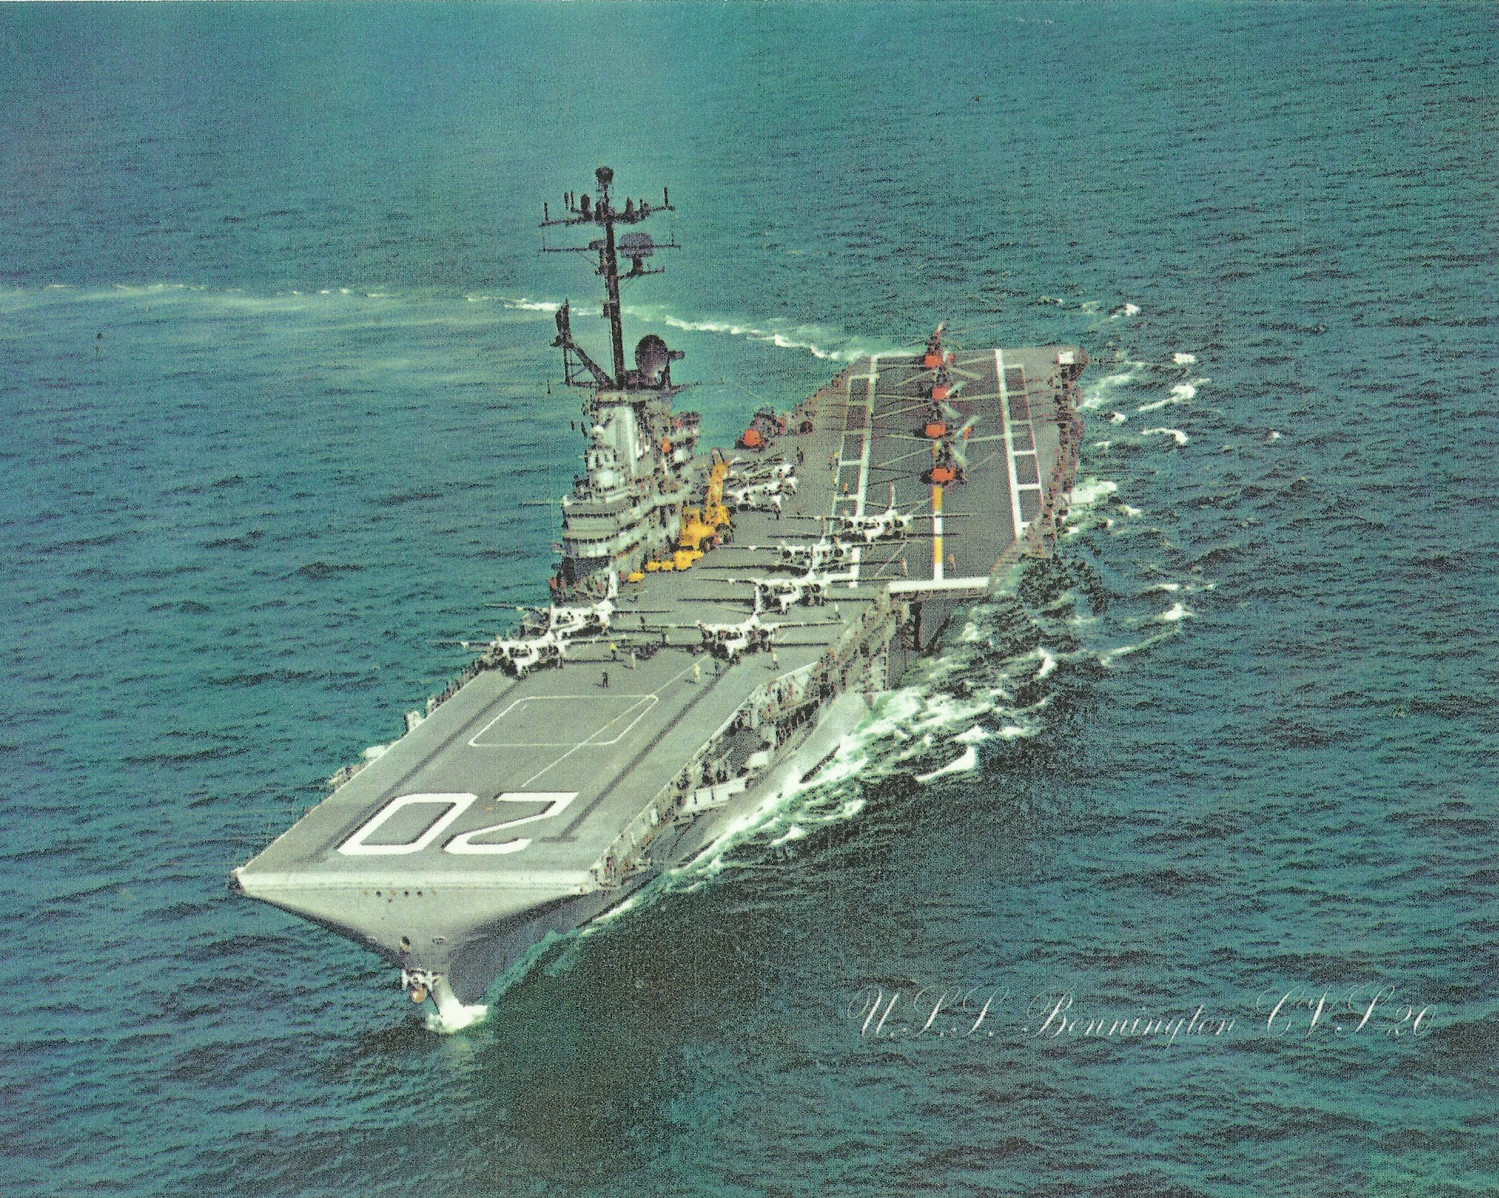 Bobby Berger’s service includes one year of active combat duty on the USS Bennington off the coast of Vietnam in the South China Sea. “The Bennington was the biggest boat I’d ever seen, let alone be on,” Berger said. “It wasn’t one of the biggest carriers, but it sure did look huge to me.”